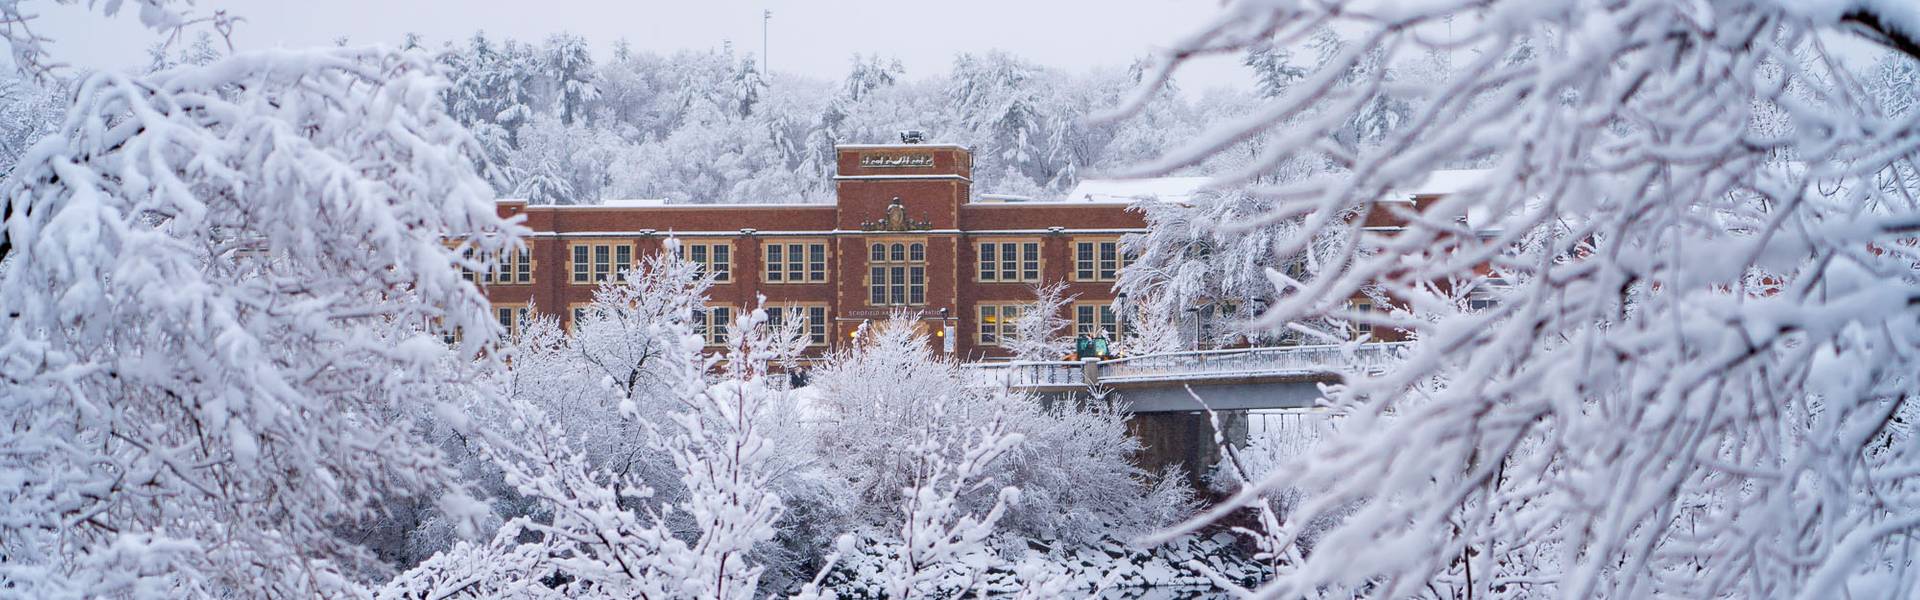 Schofield Hall in the background of snowy branches.